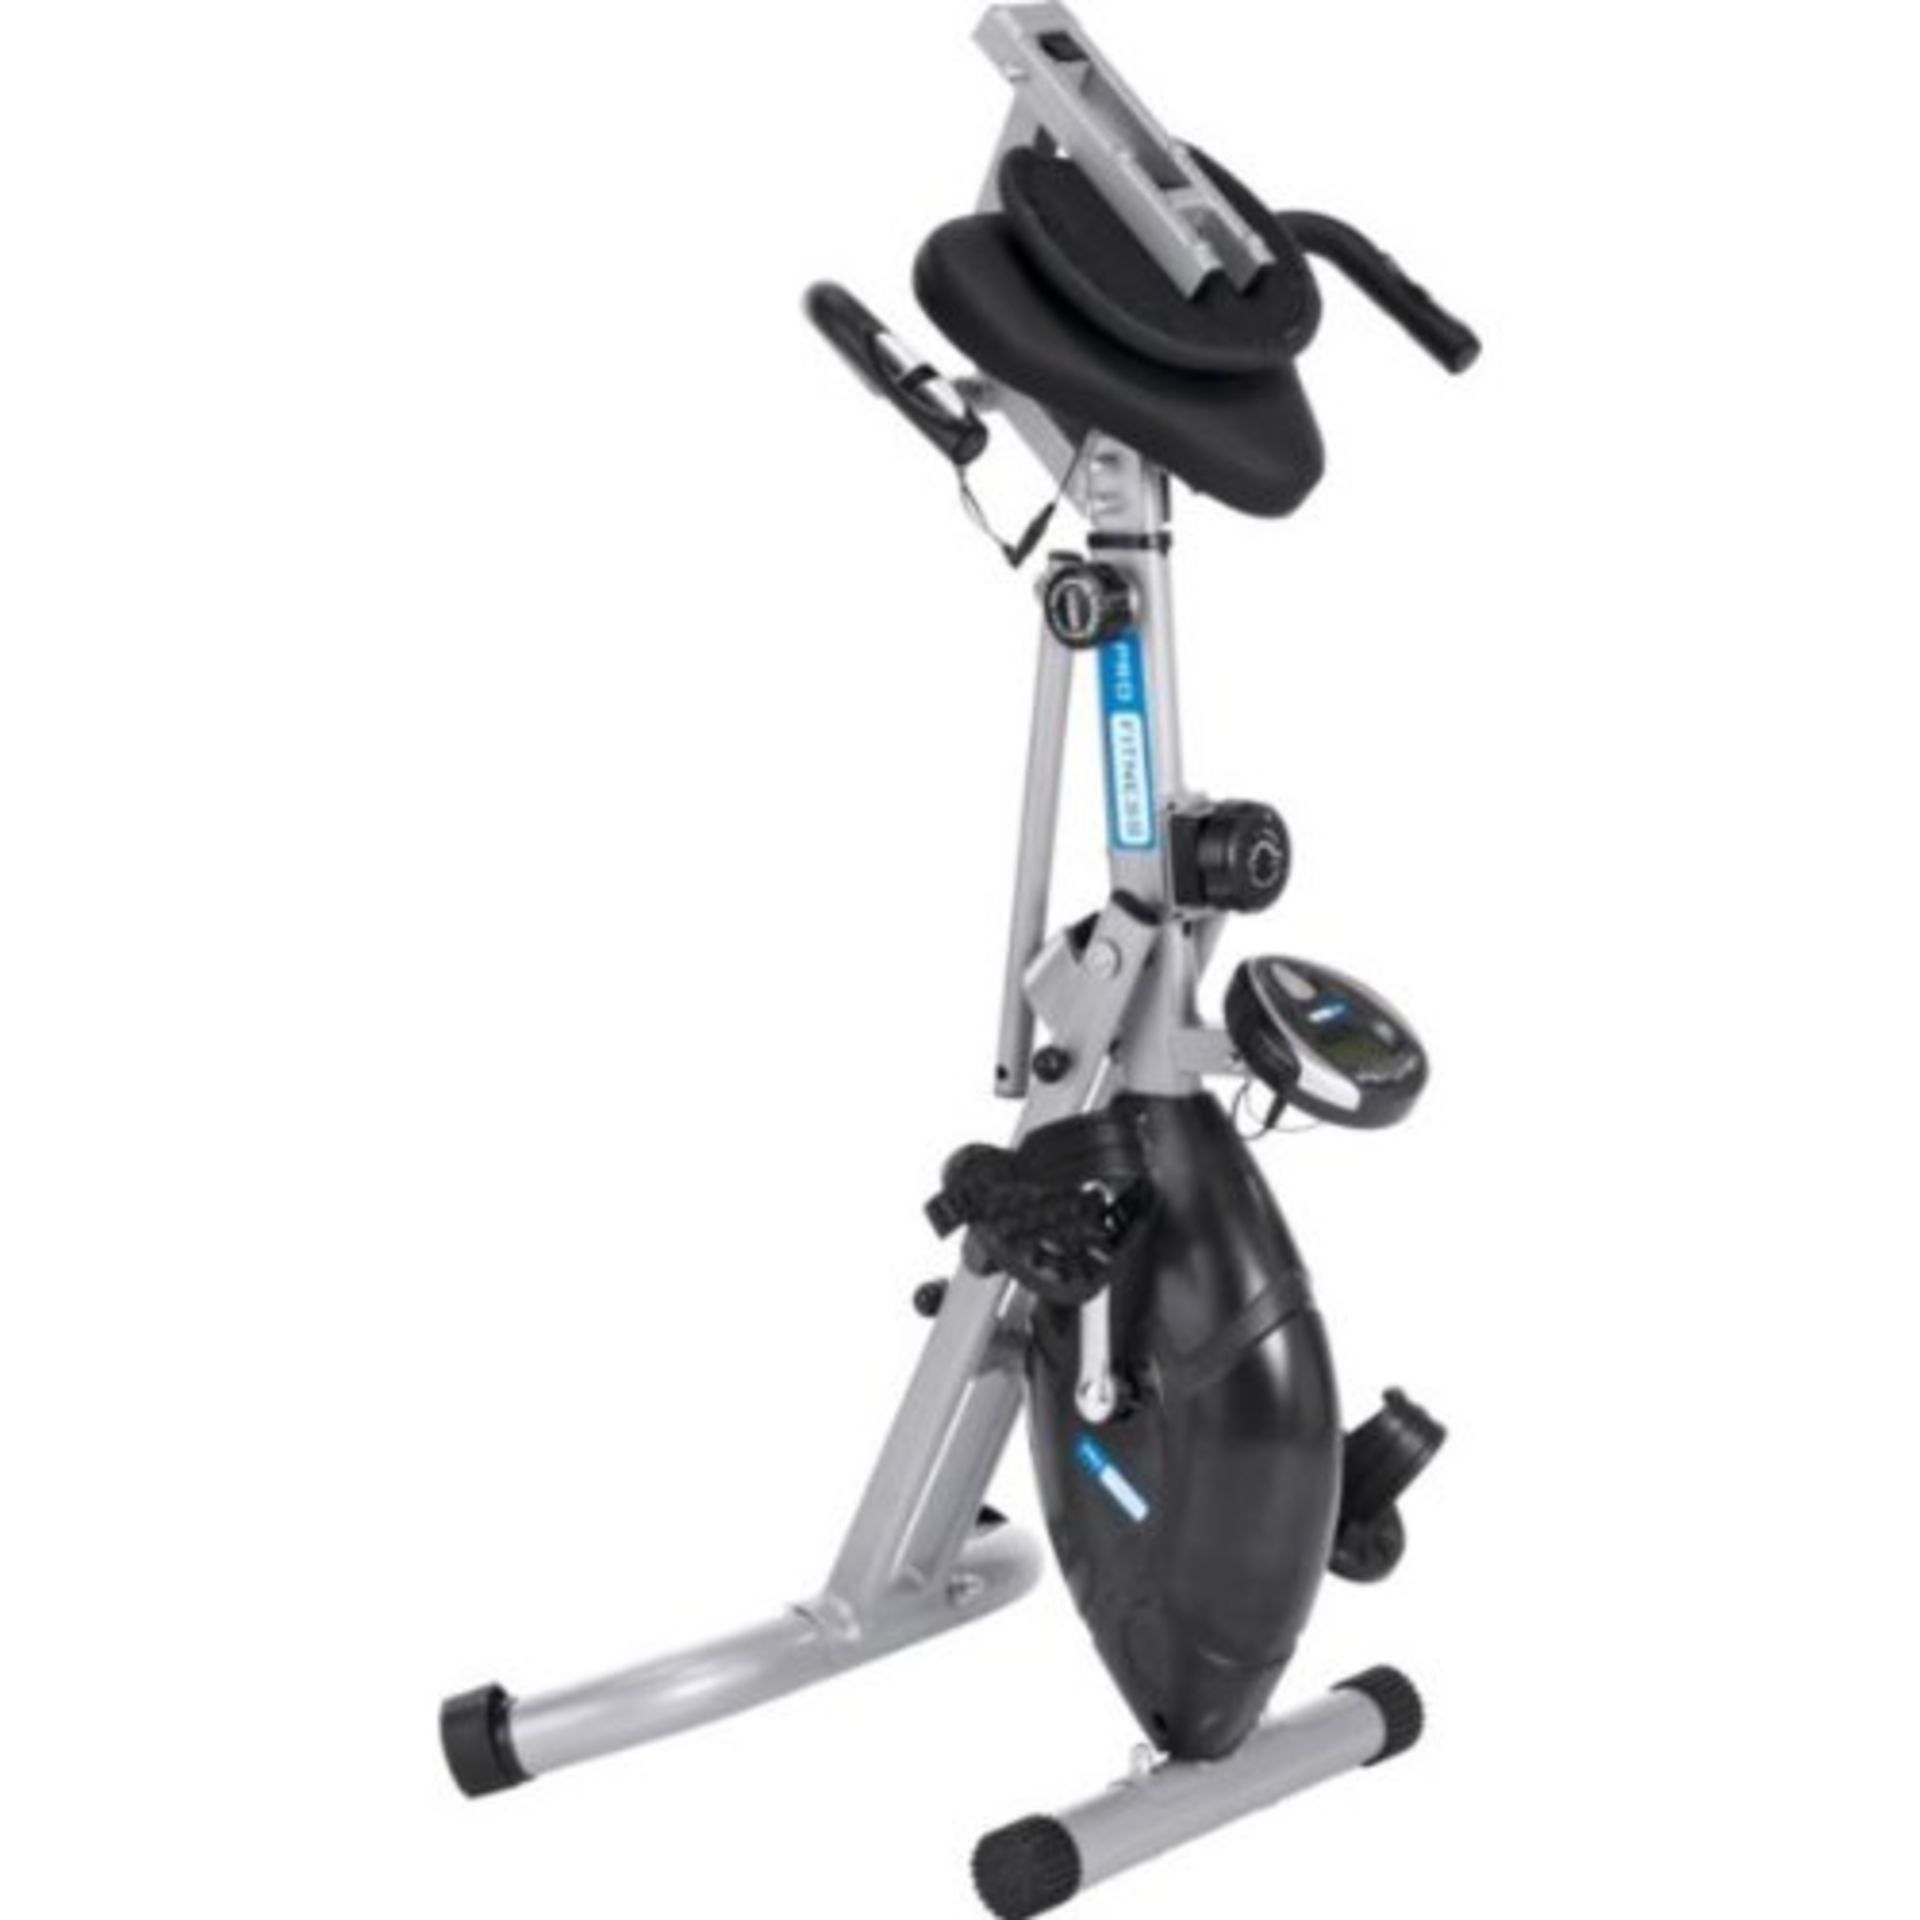 1 x Pro Fitness Recumbent Folding Exercise Bike - CL007 - Excellent Condition - Workout and Tone - Image 3 of 5